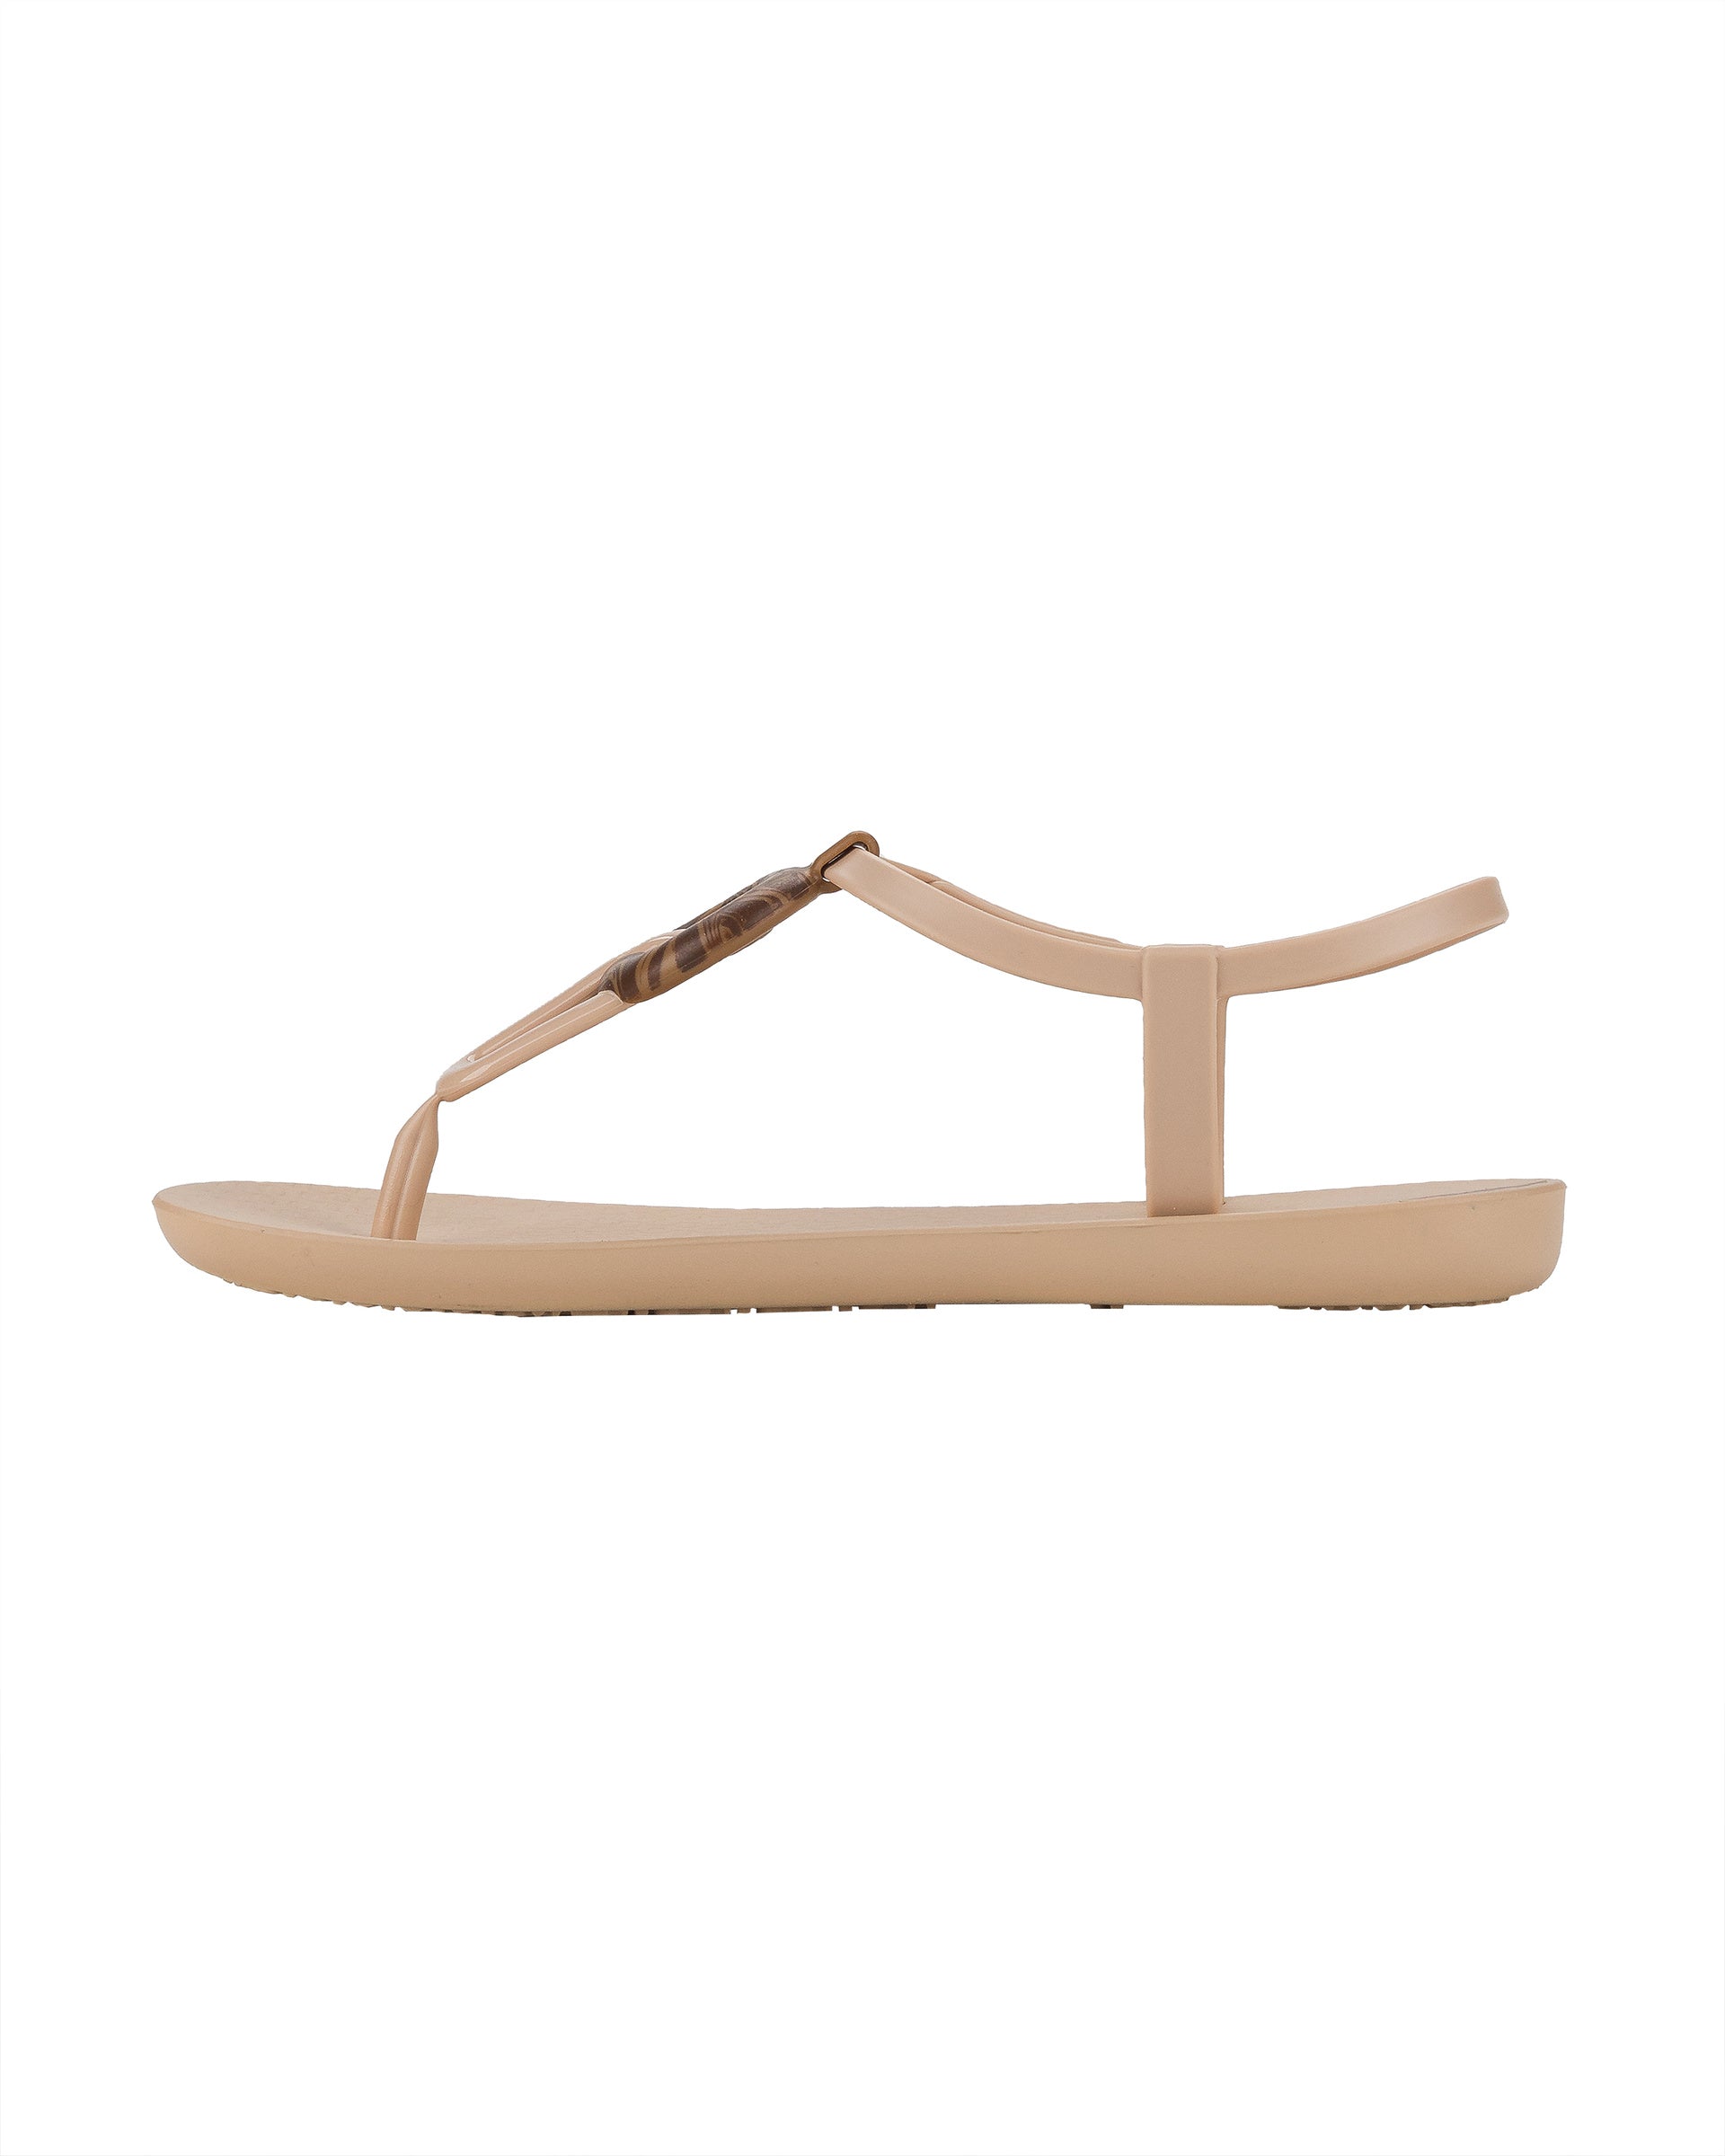 Inner side view of a beige Ipanema Class Marble women's t-strap sandal.